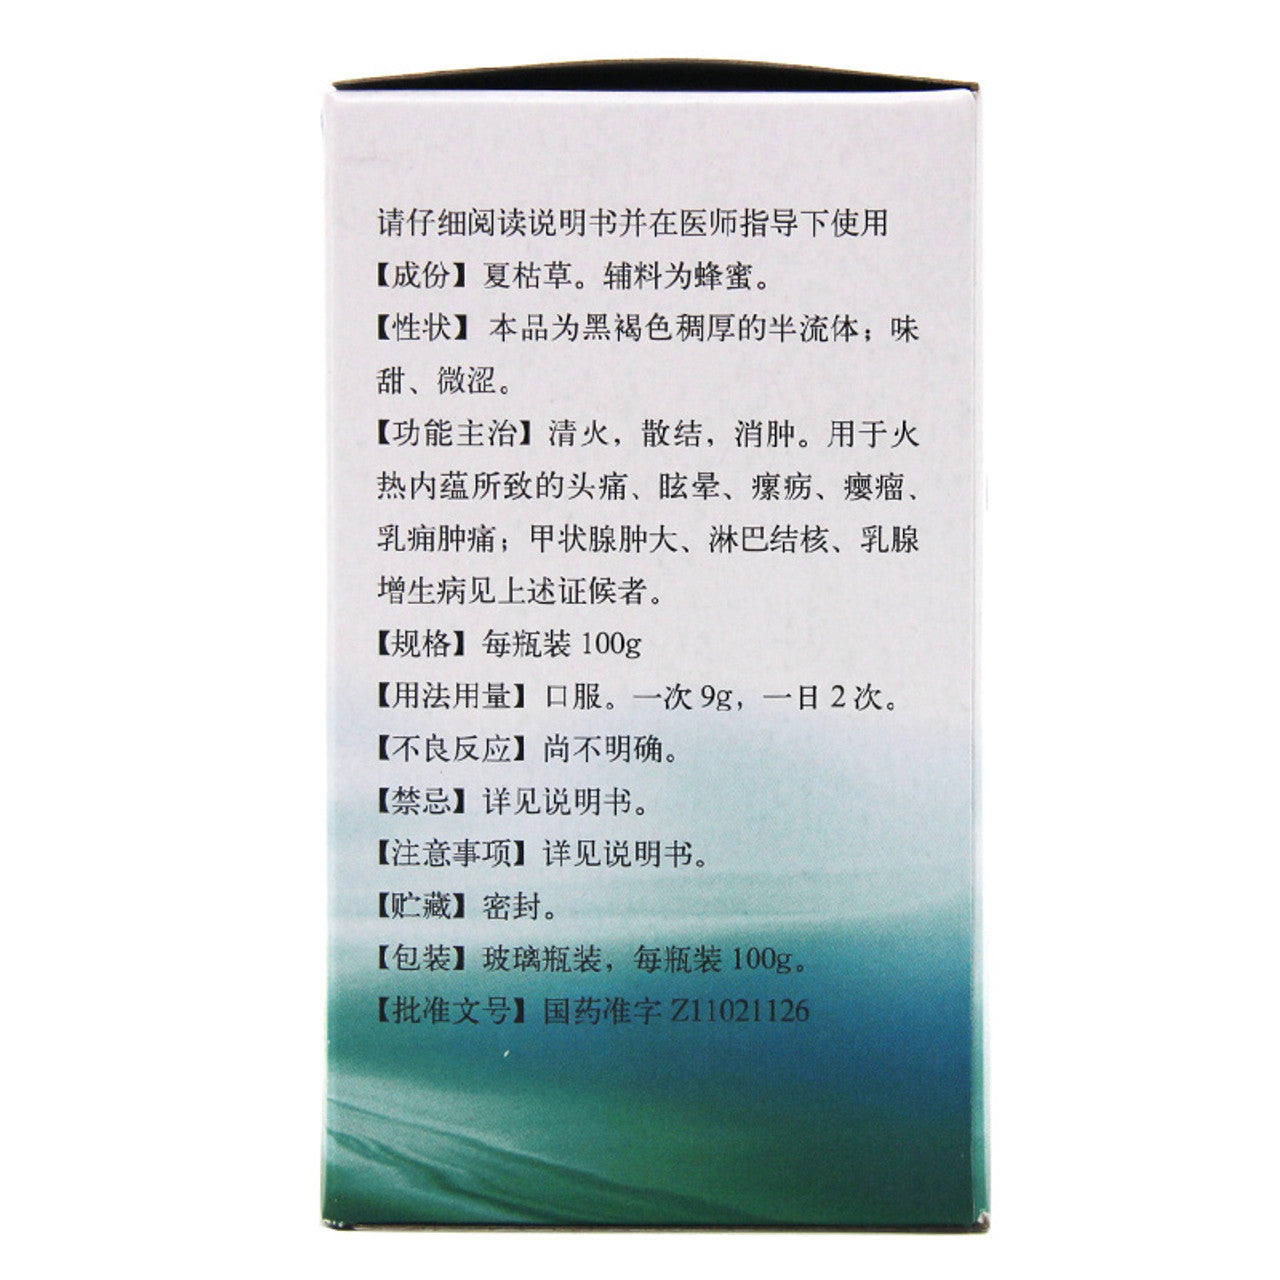 China Herb Syrup. Brand Tongrentang. Xiakucao Gao or Xiakucao Syrup or Xiao Ku Cao Gao or Xia Ku Cao Syrup for goiter, lymphatic tuberculosis, and hyperplasia of mammary glands caused by internal accumulation of heat.